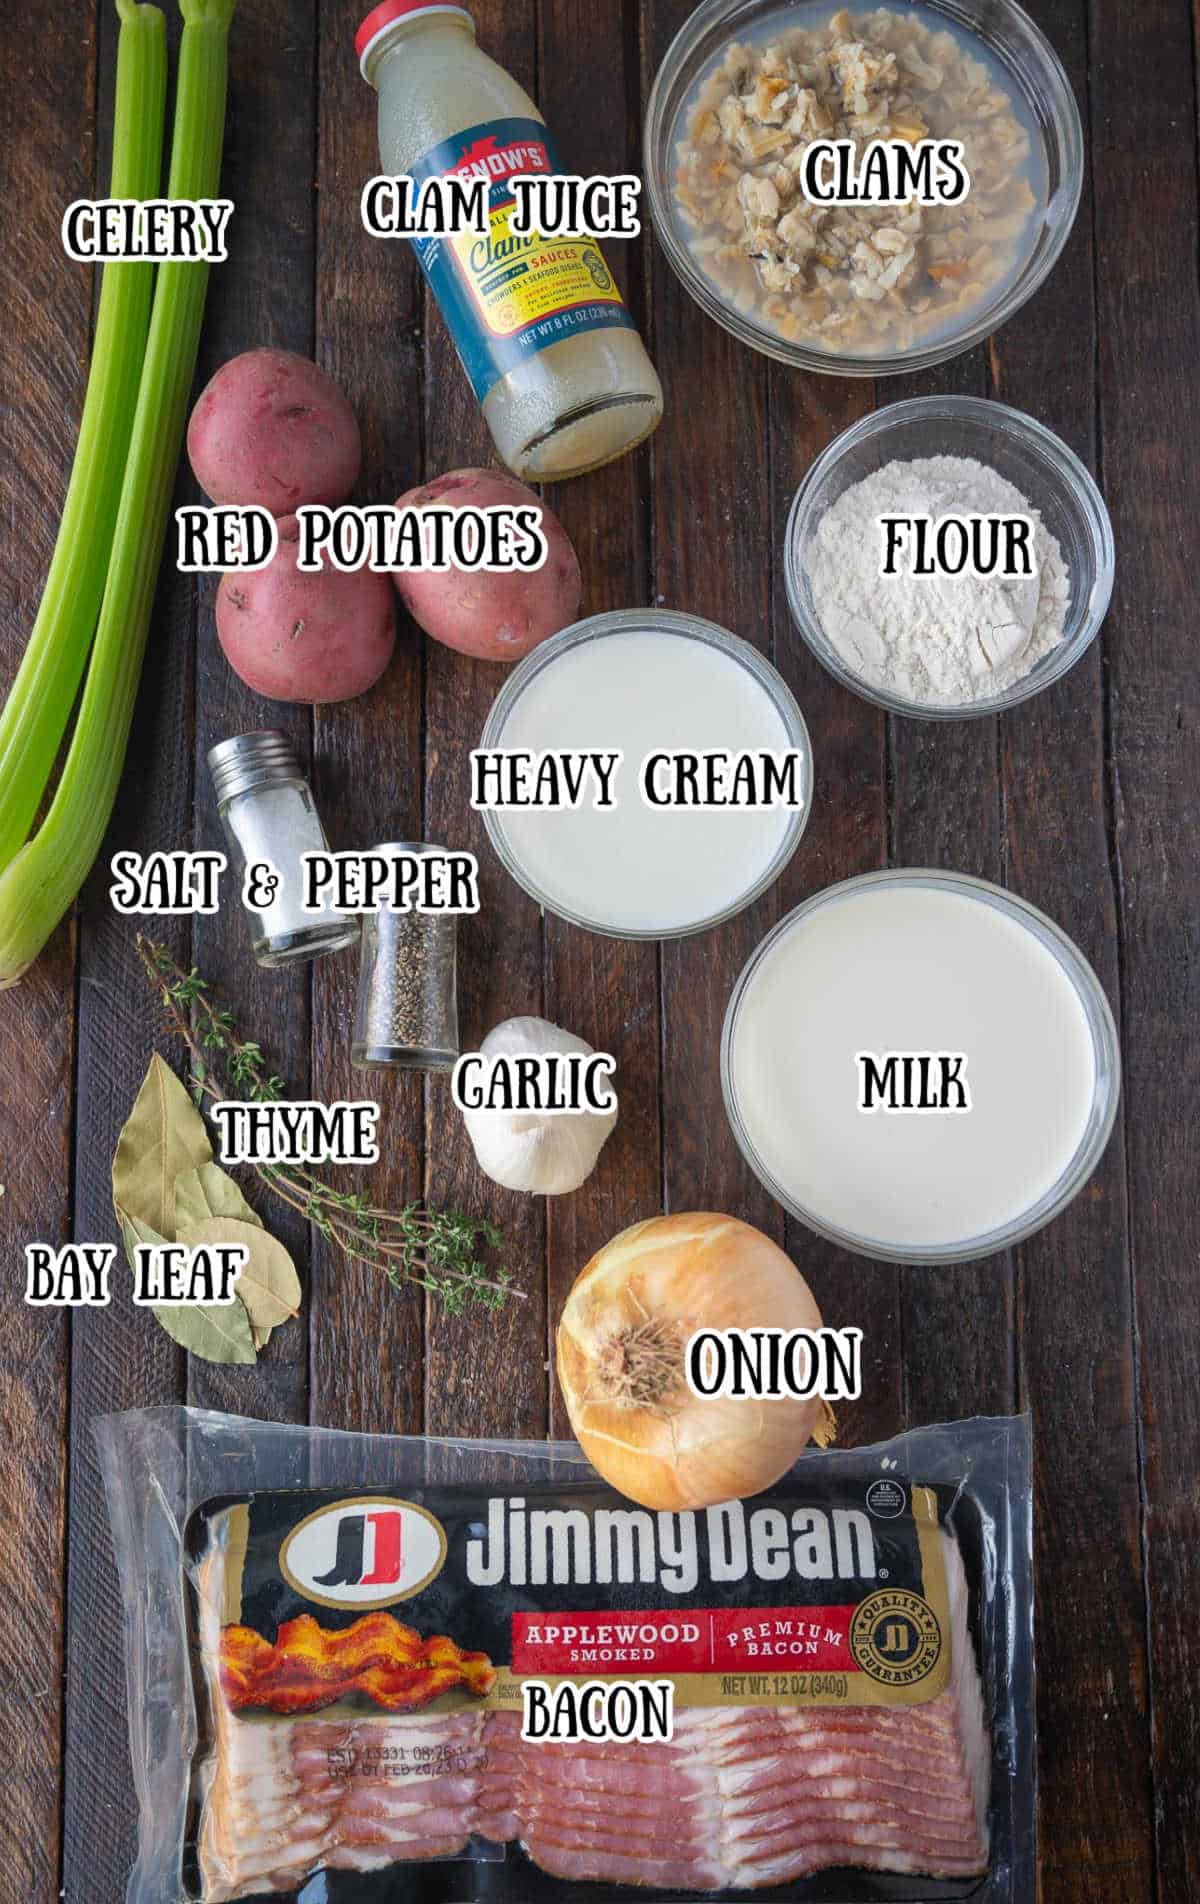 All the ingredients needed for this clam chowder.